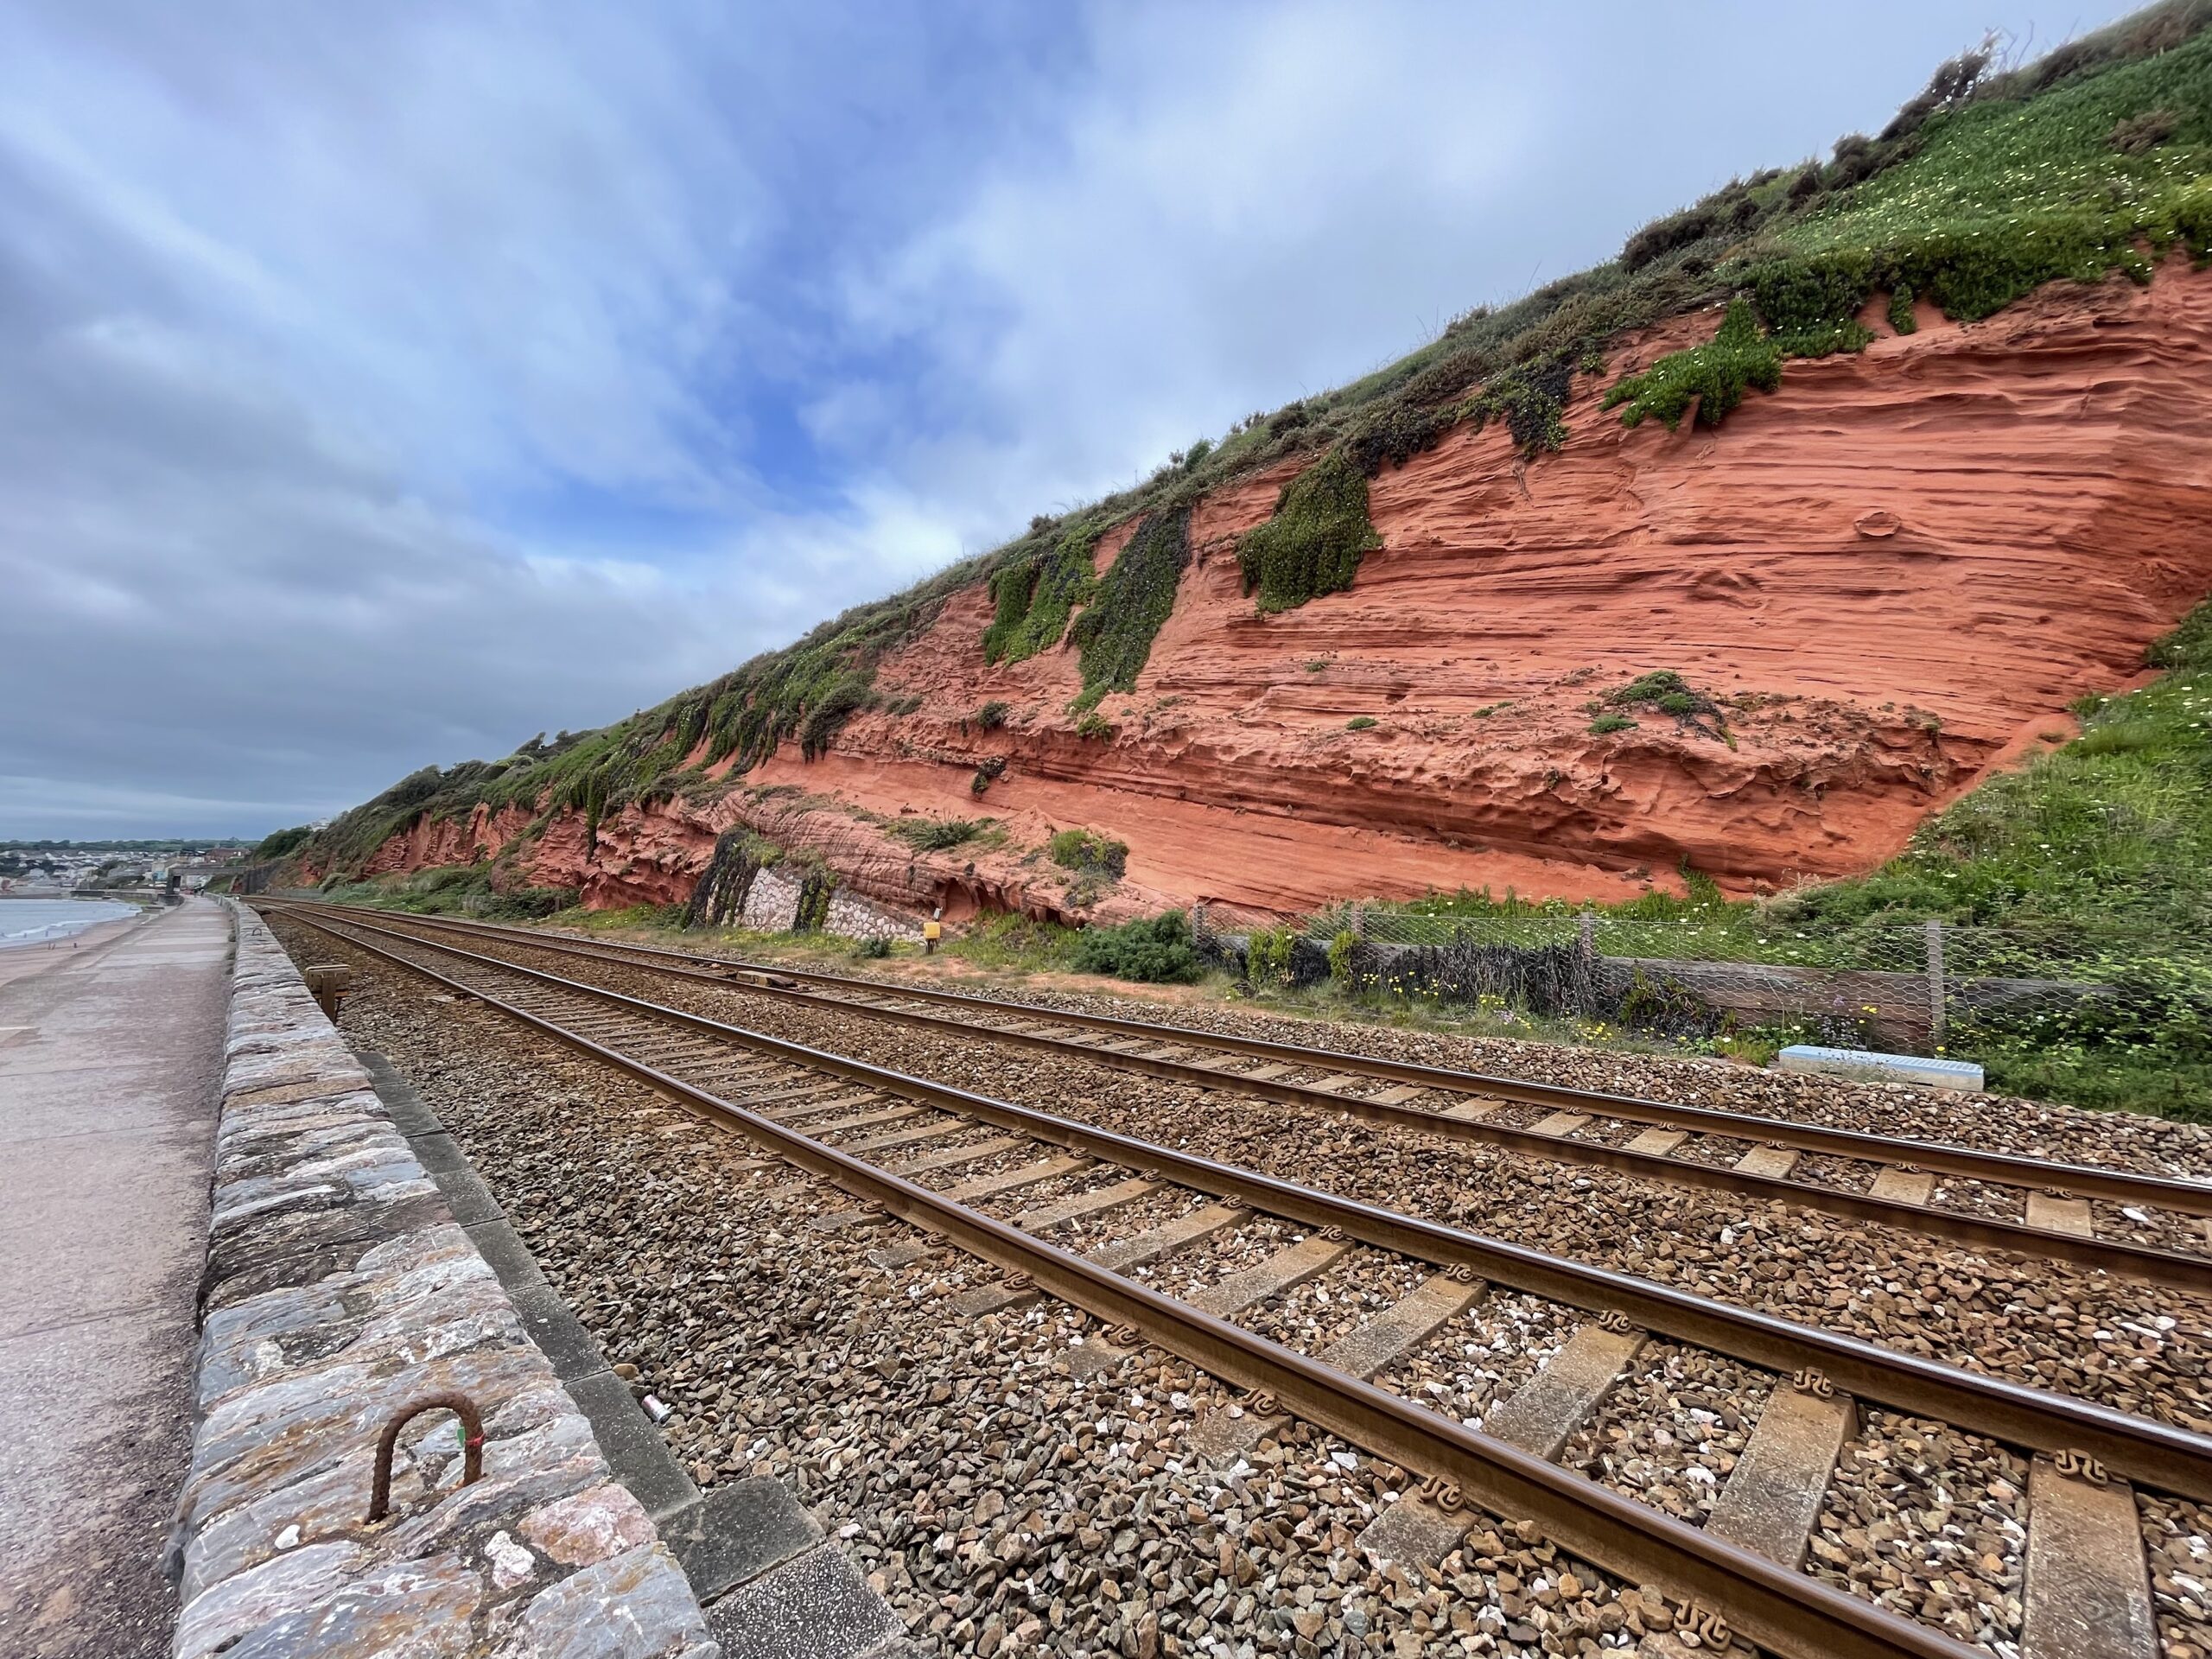 The main line at Dawlish, which runs right by the sea